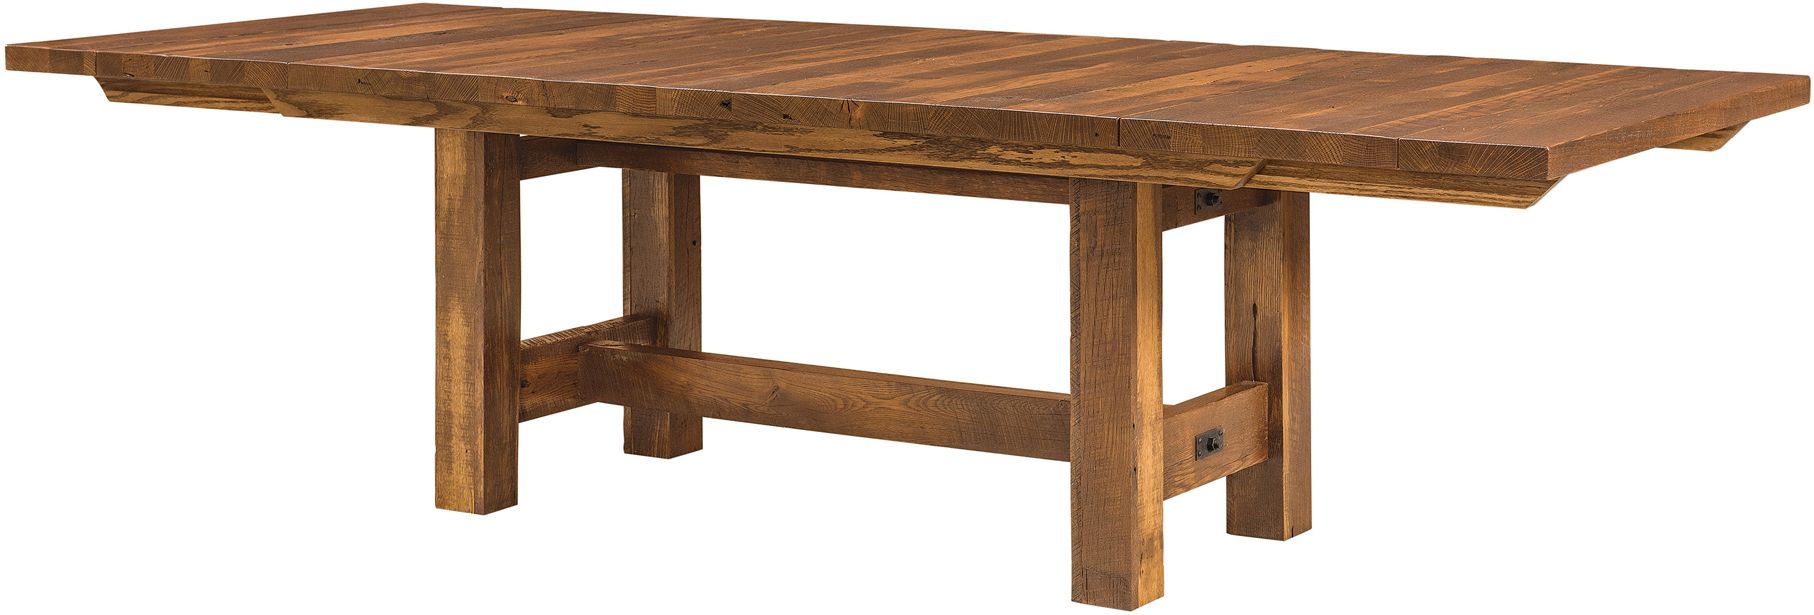 Most Current Haddington 42'' Trestle Dining Tables With Lynchburg Trestle Dining Table (View 3 of 20)